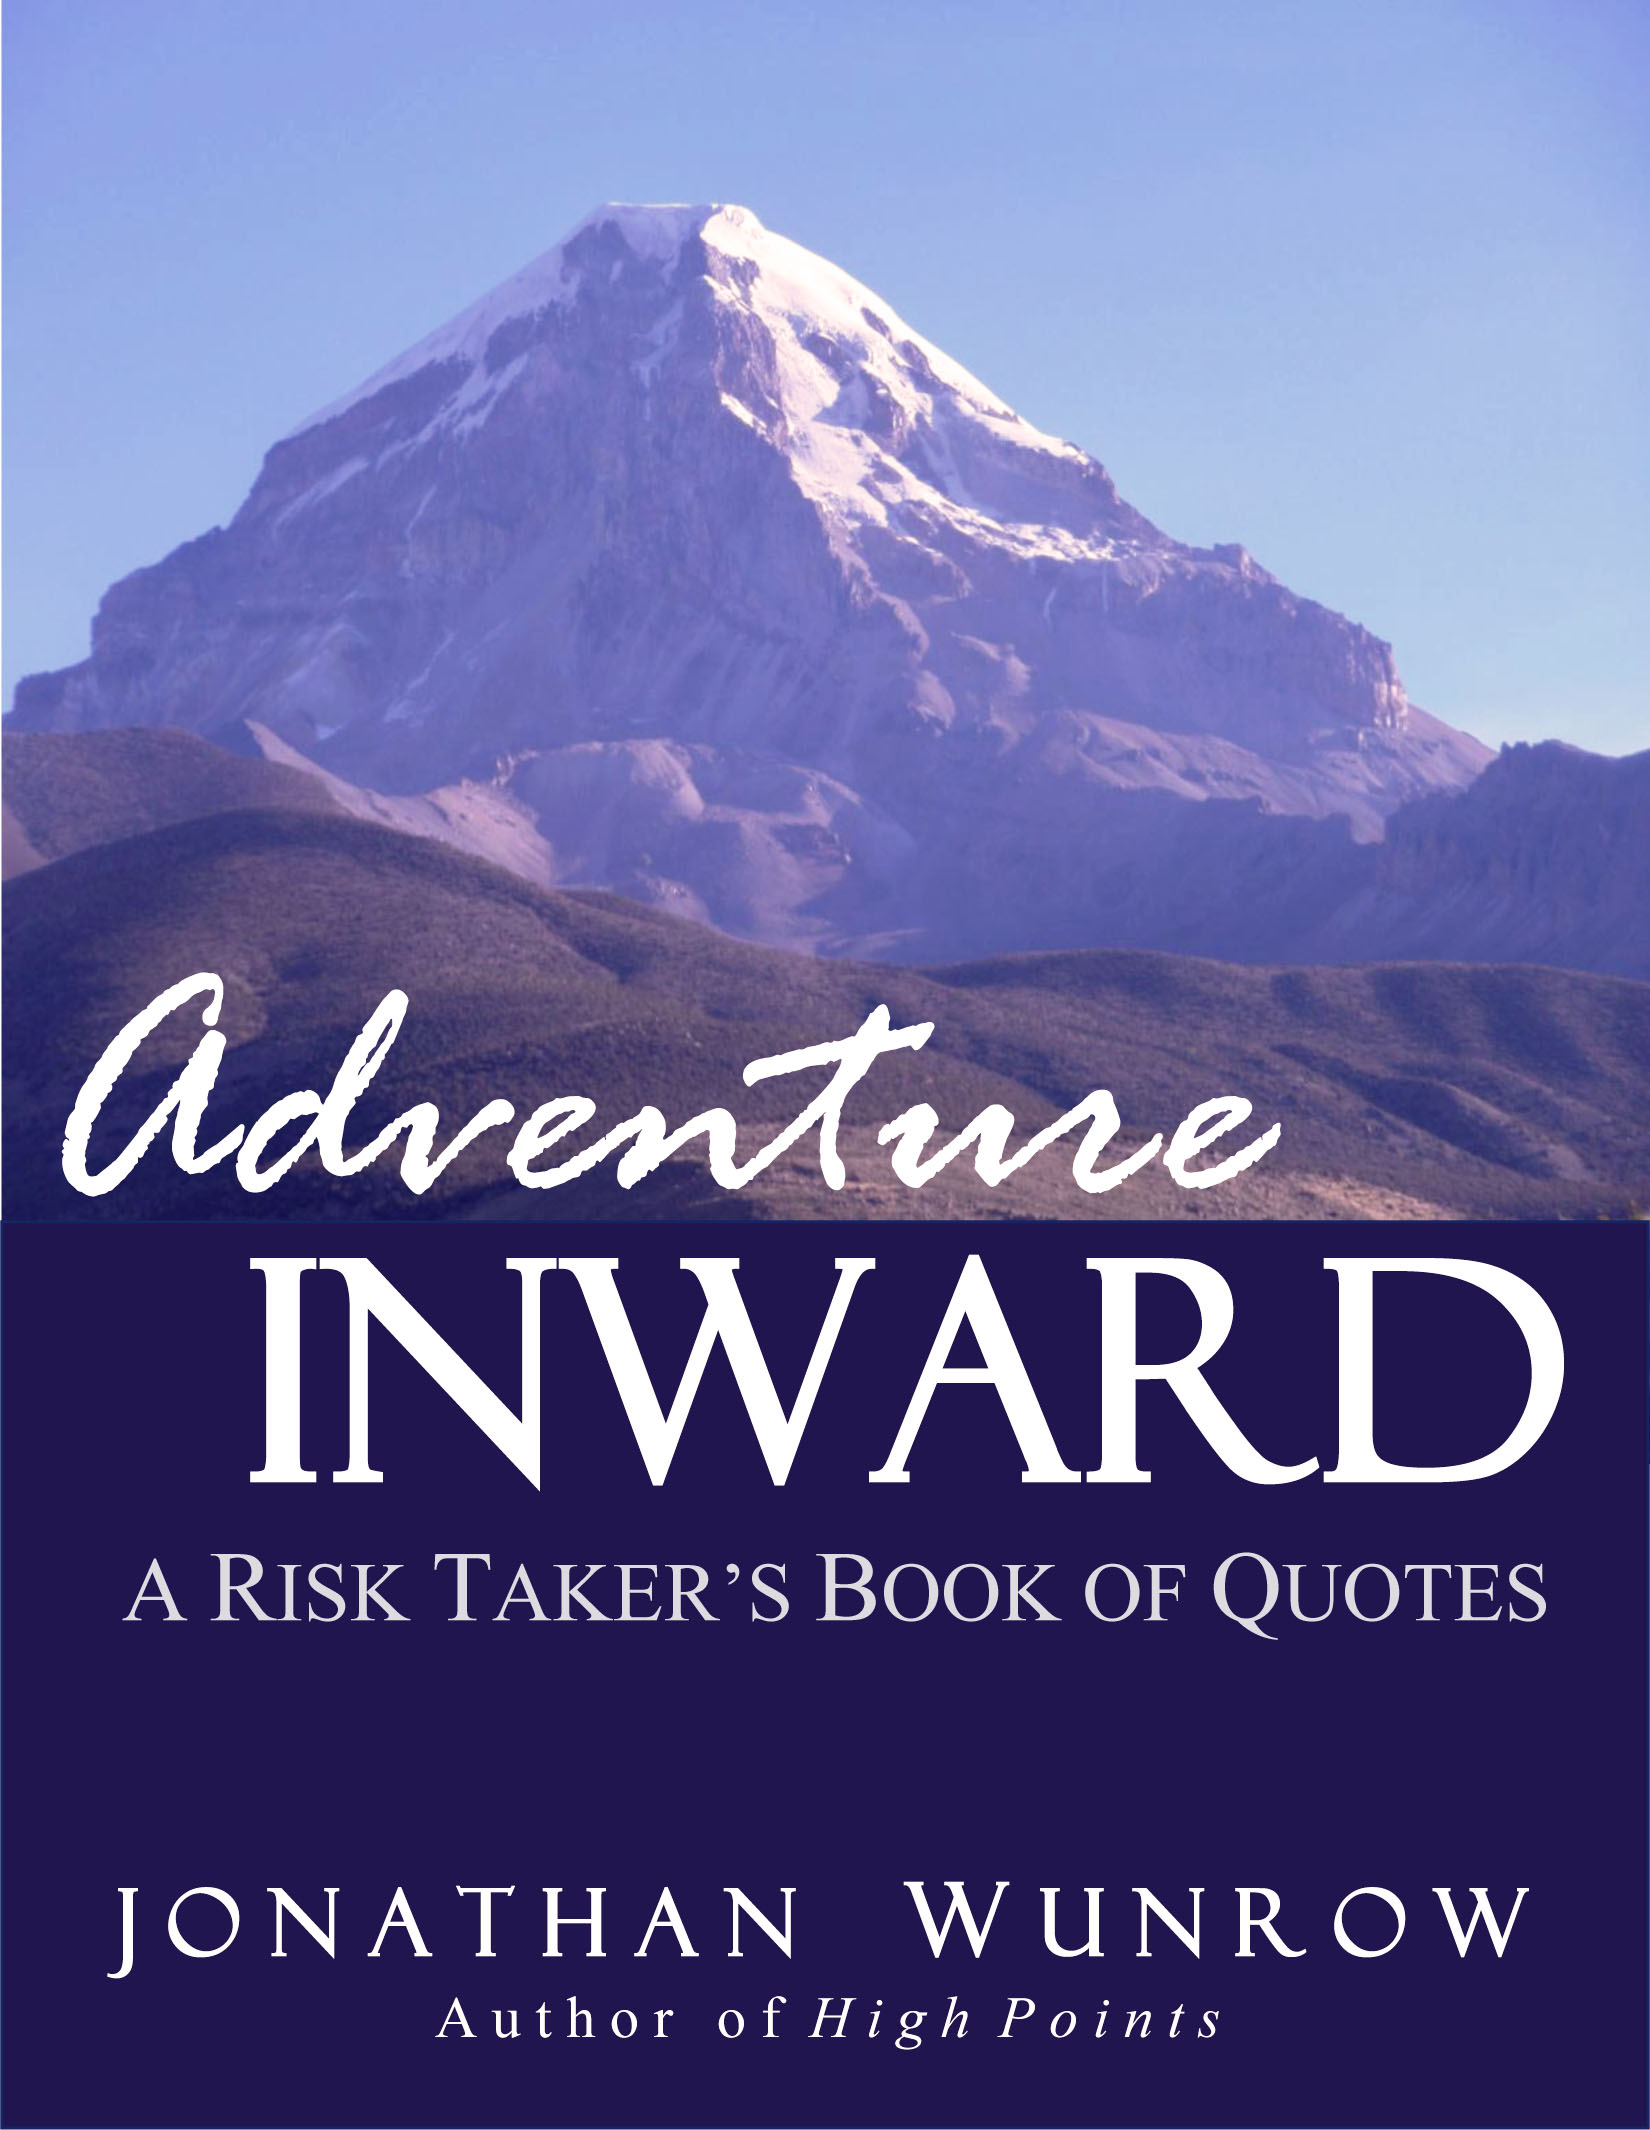 A STORY ABOUT ‘ADVENTURE INWARD: A RISK TAKER’S BOOK OF ...